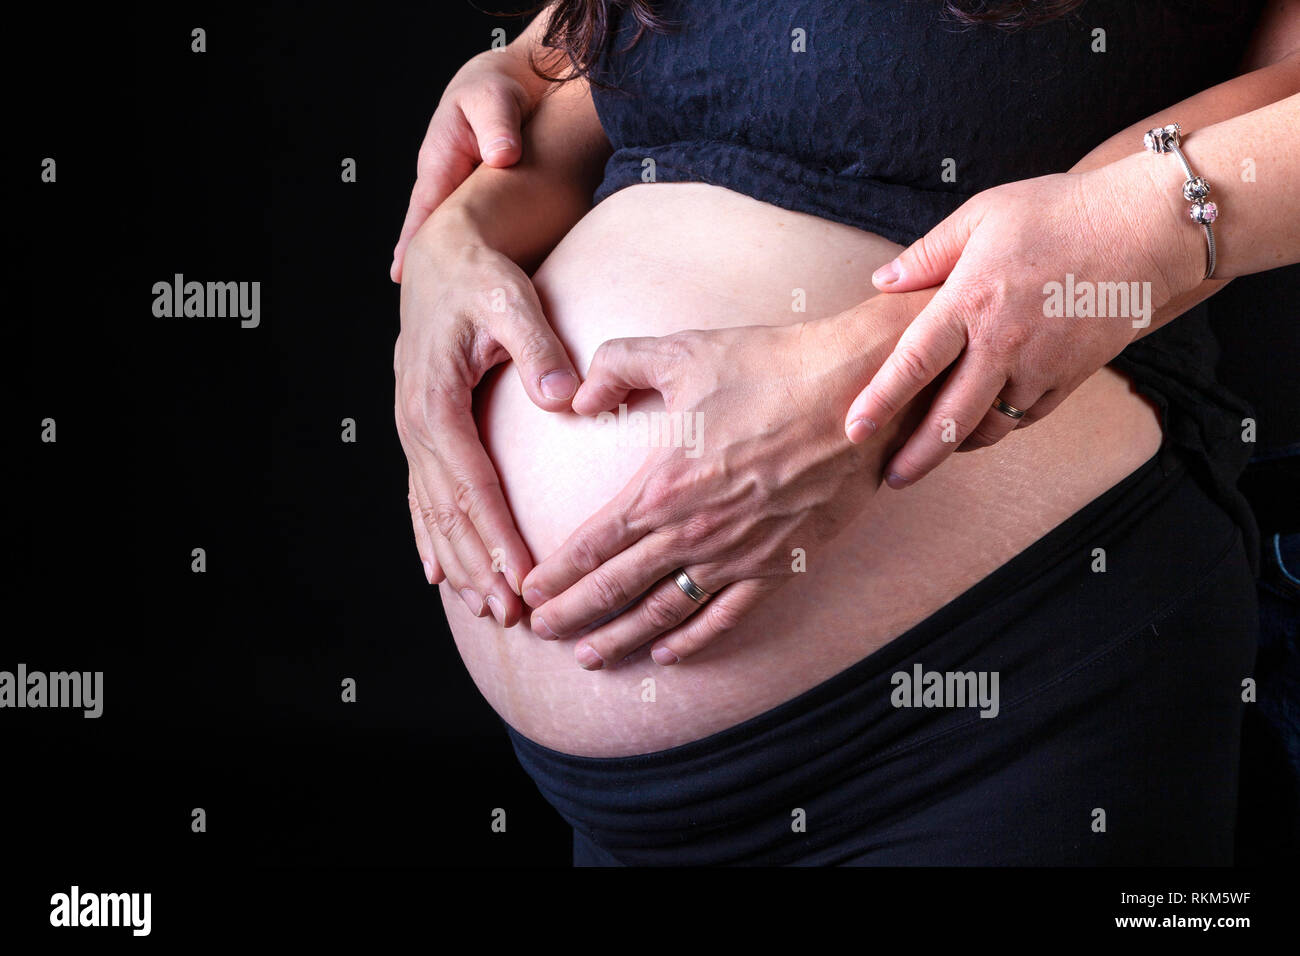 Pregnant woman with husband's hands over her tummy in the shape of a heart symbolizing love. Isolated on black background. Stock Photo